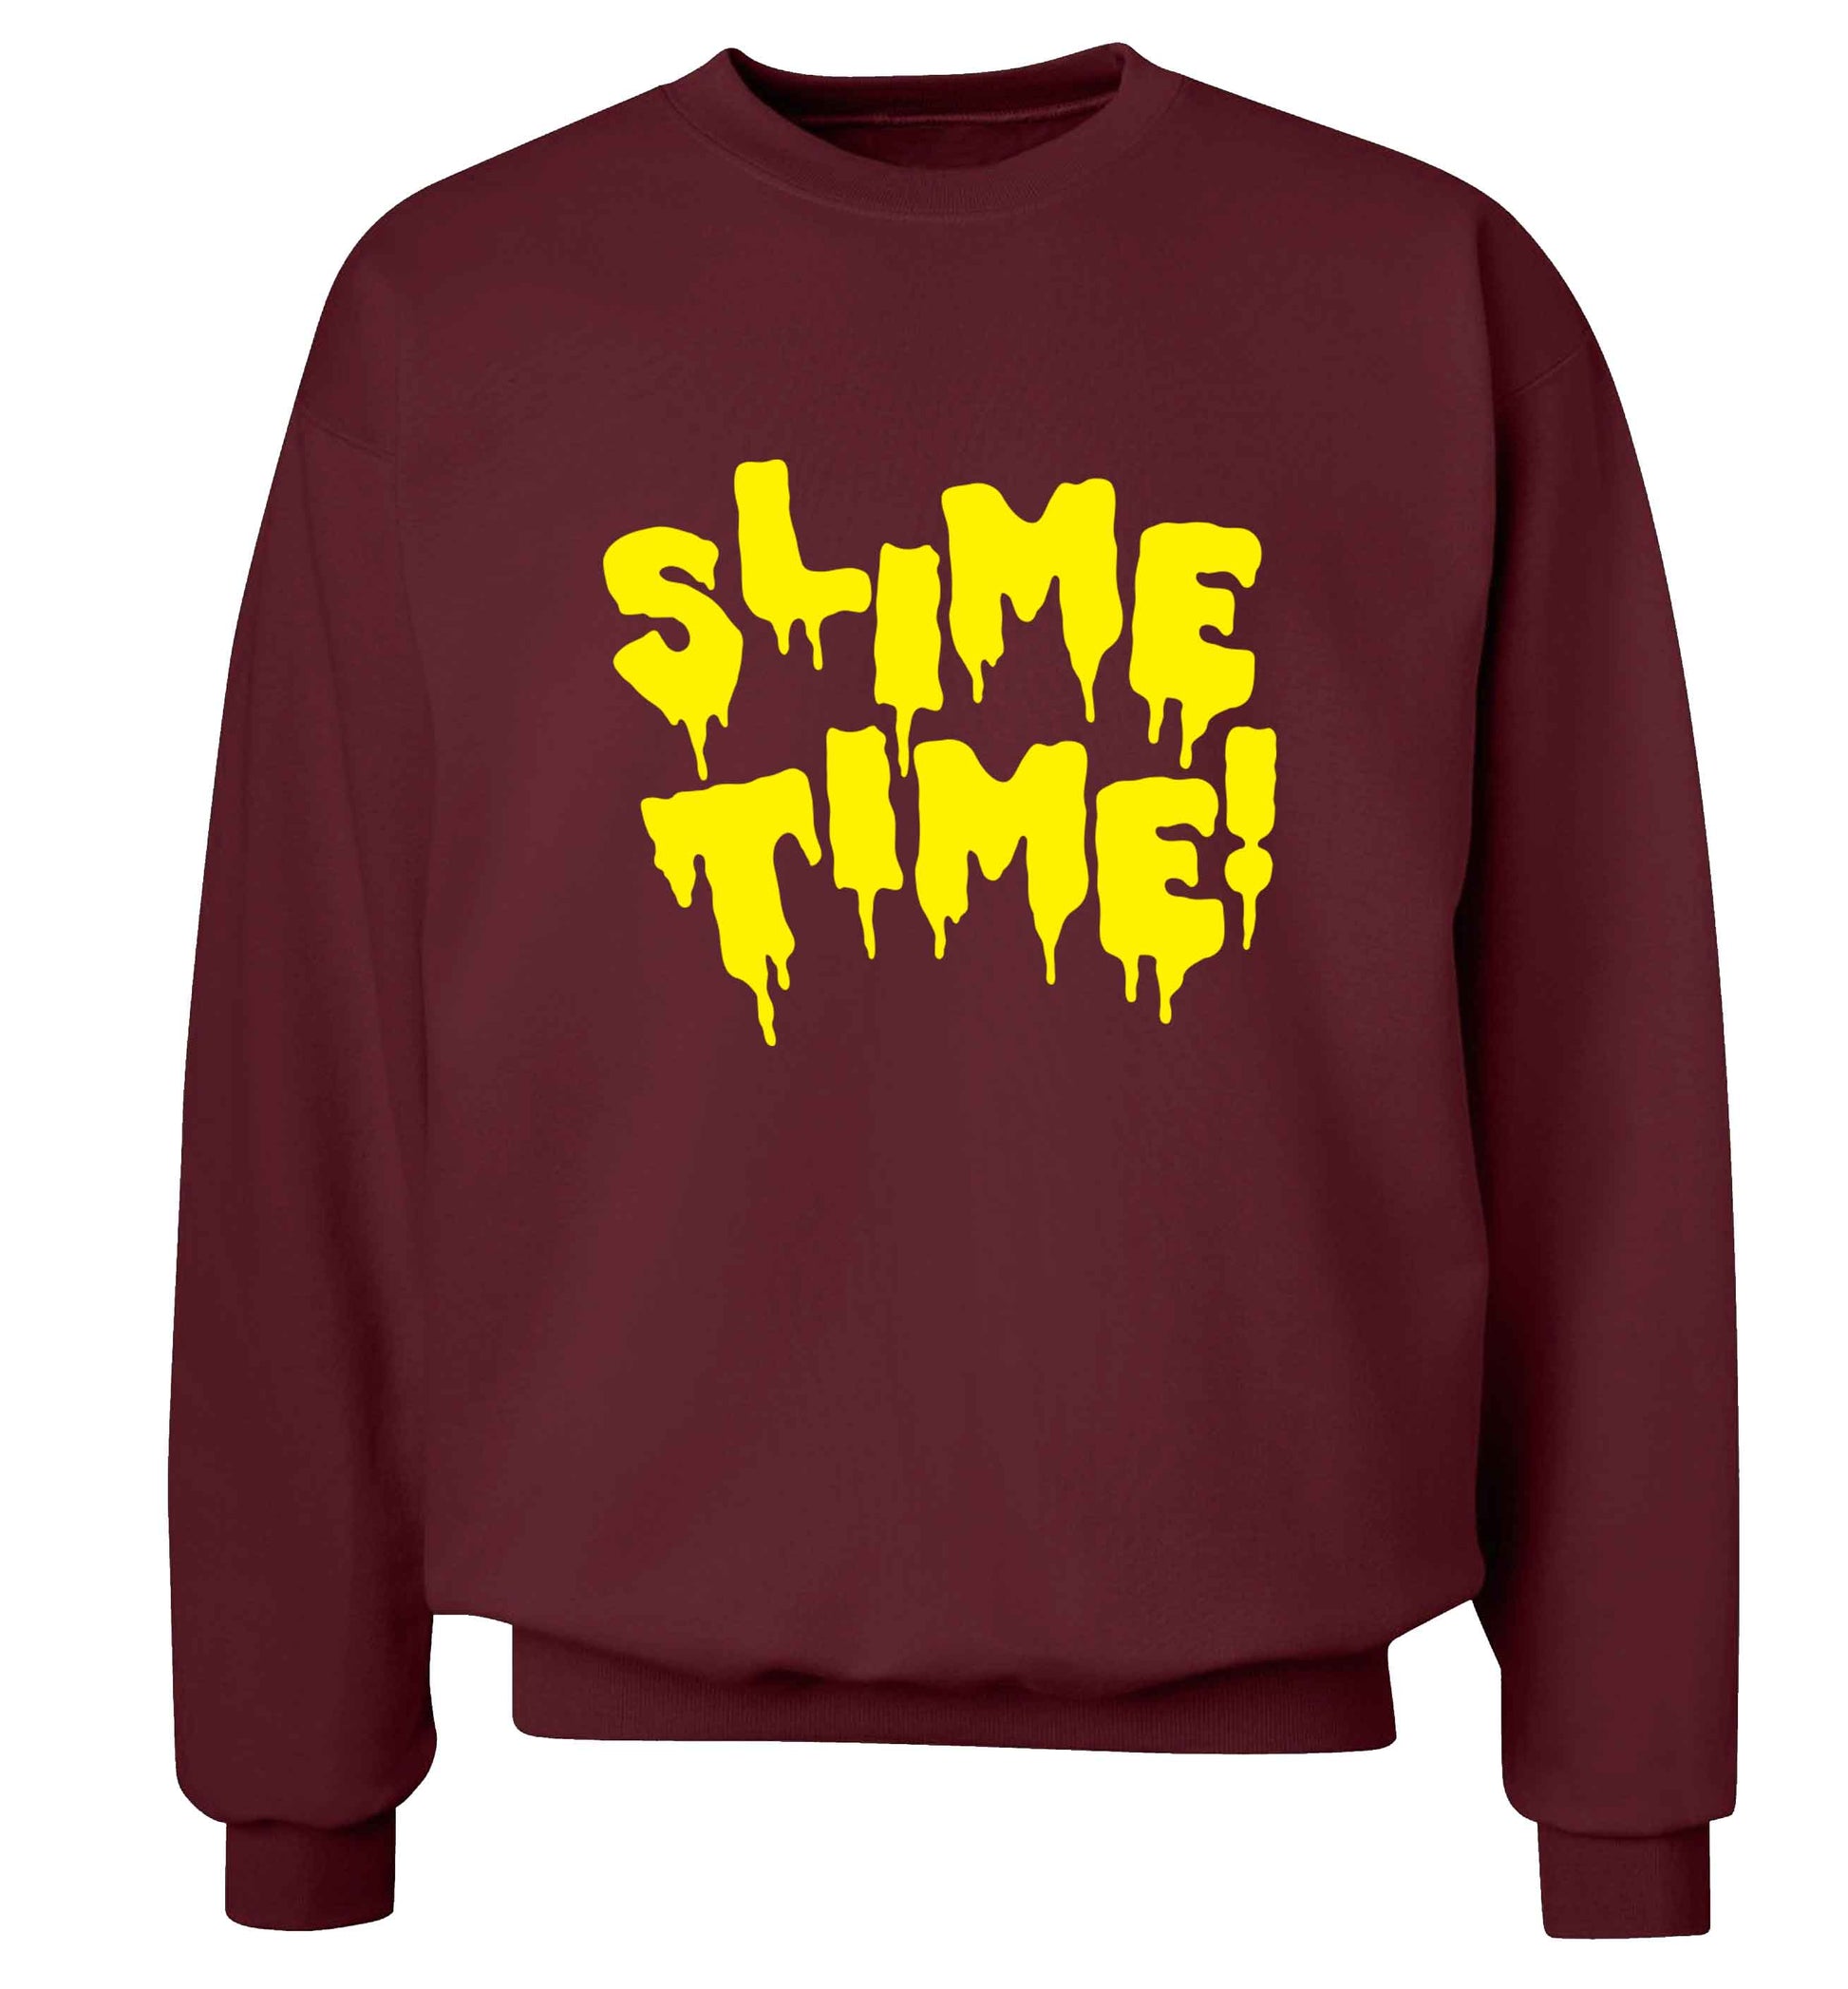 Neon yellow slime time adult's unisex maroon sweater 2XL